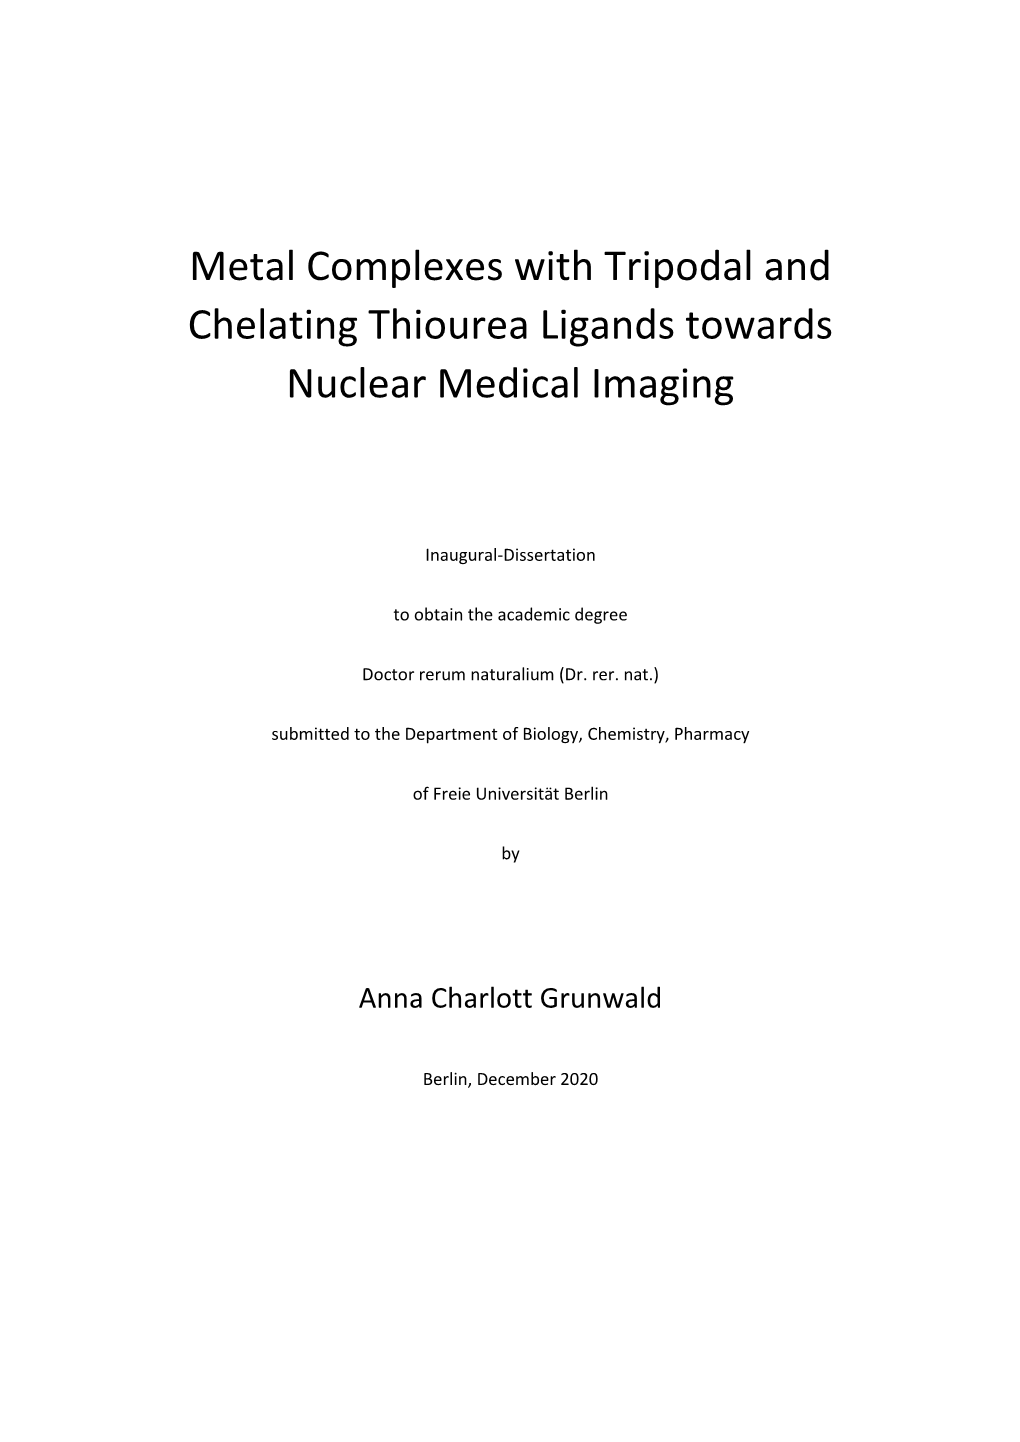 Metal Complexes with Tripodal and Chelating Thiourea Ligands Towards Nuclear Medical Imaging